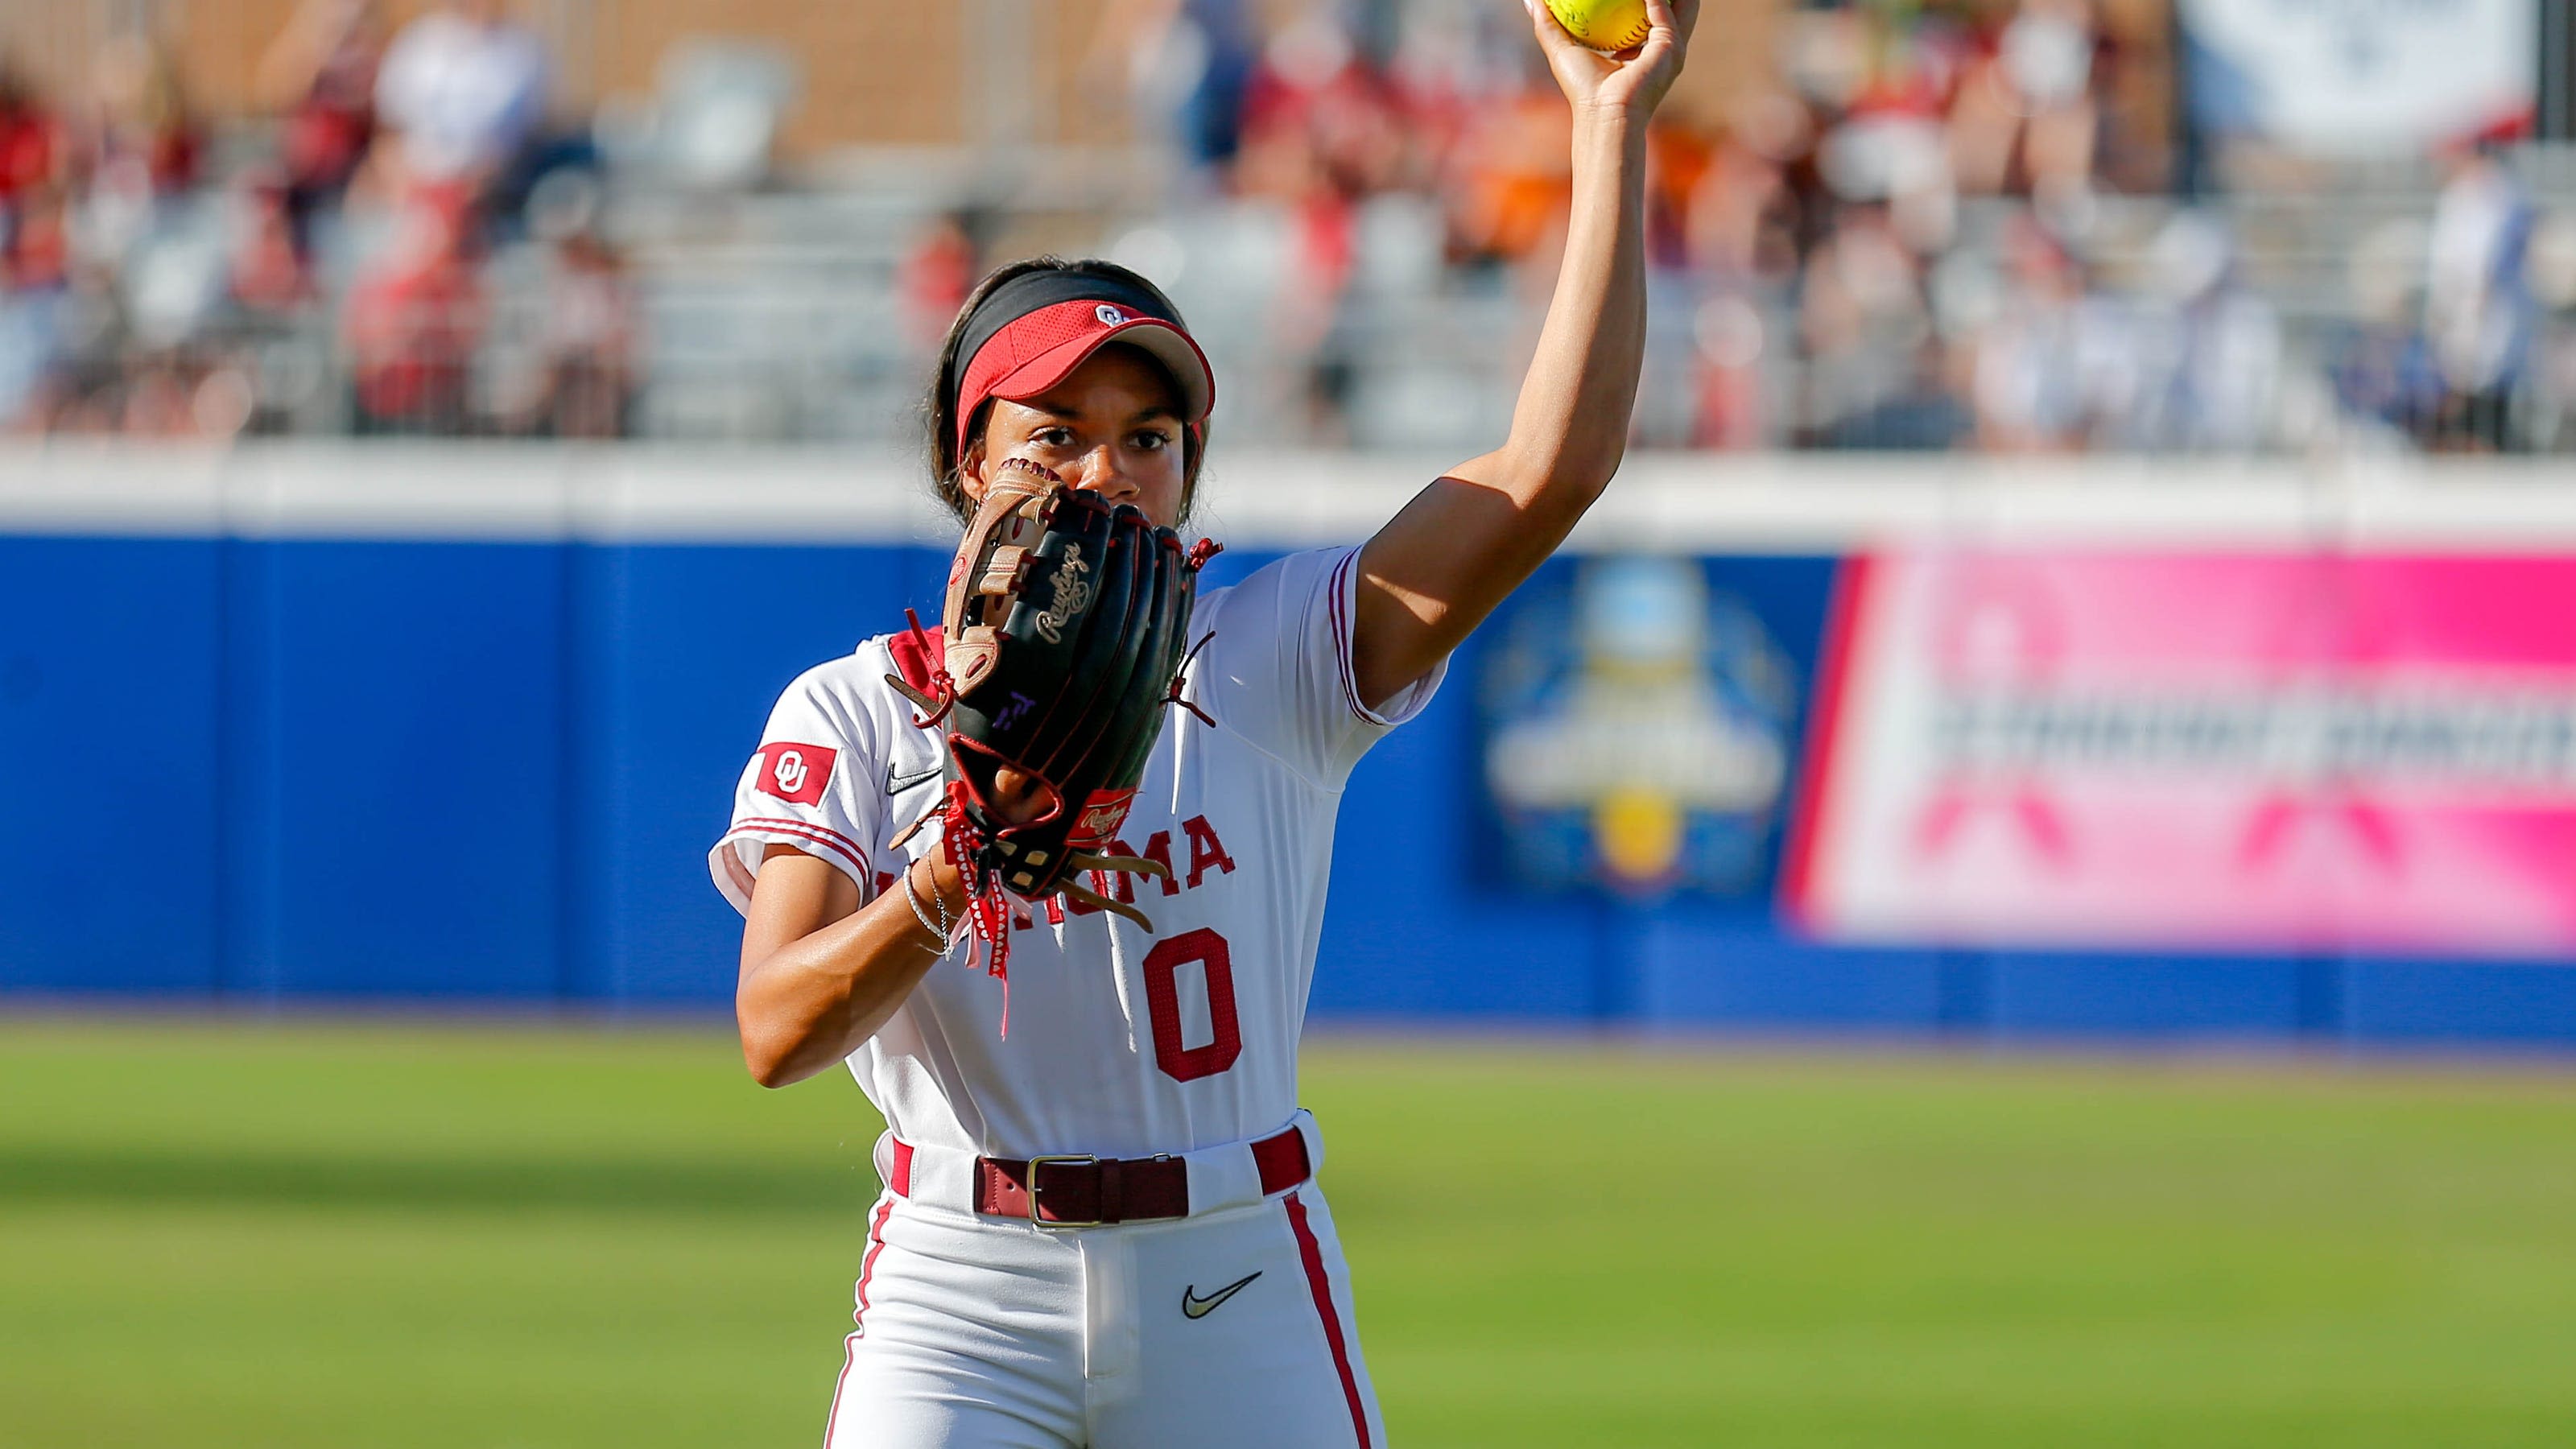 OU softball live score updates vs Texas in Game 1 of WCWS Championship Series